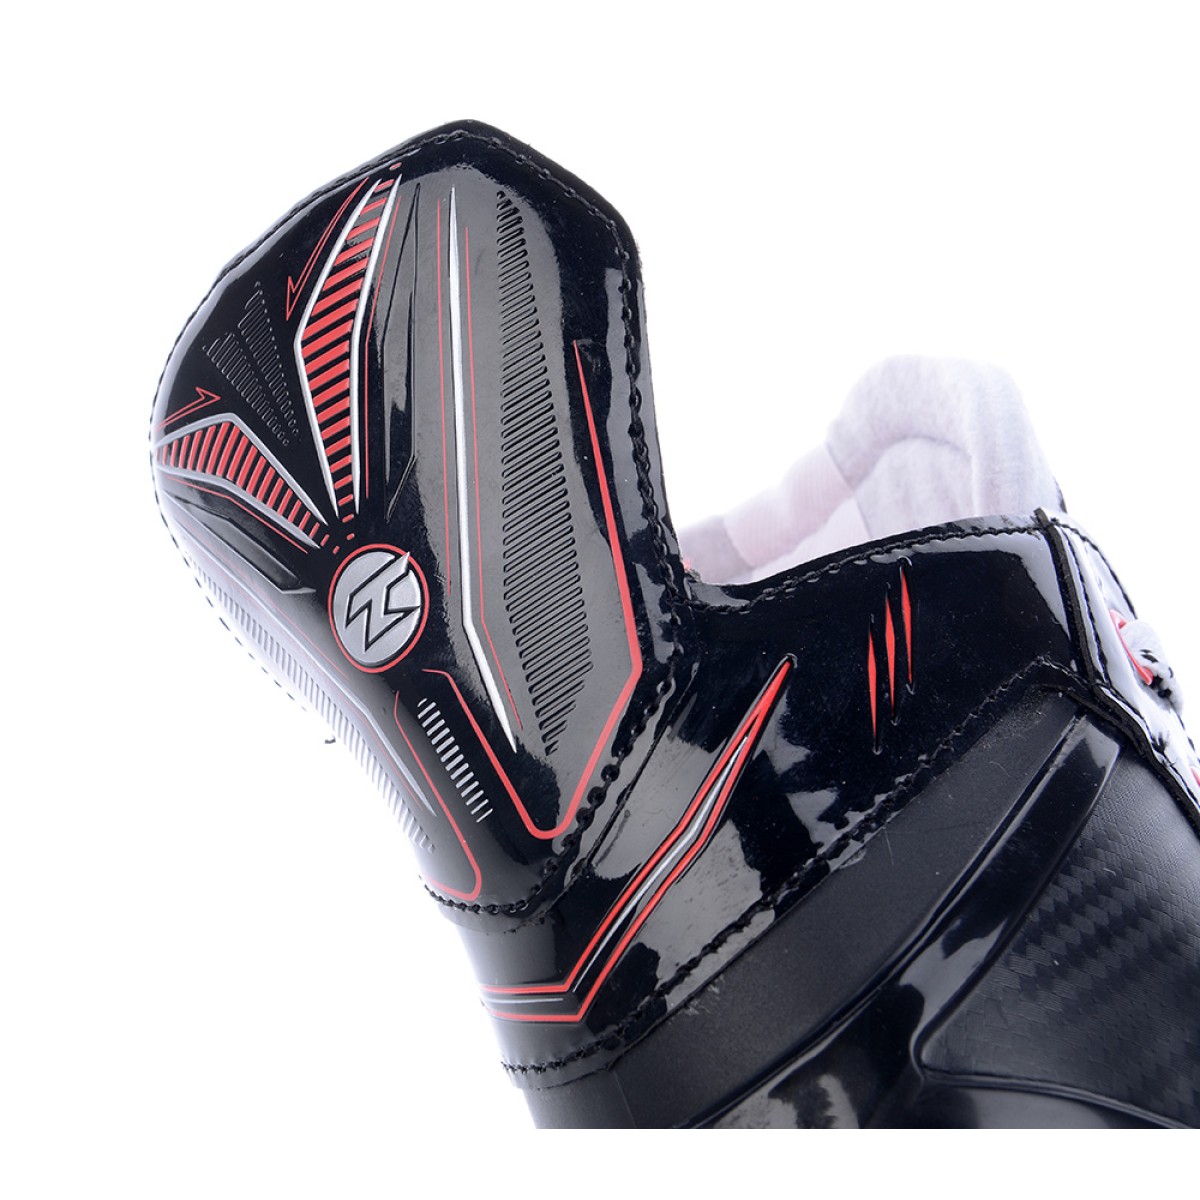 VOLT-R skates for IN-LINE hockey TEMPISH - view 22